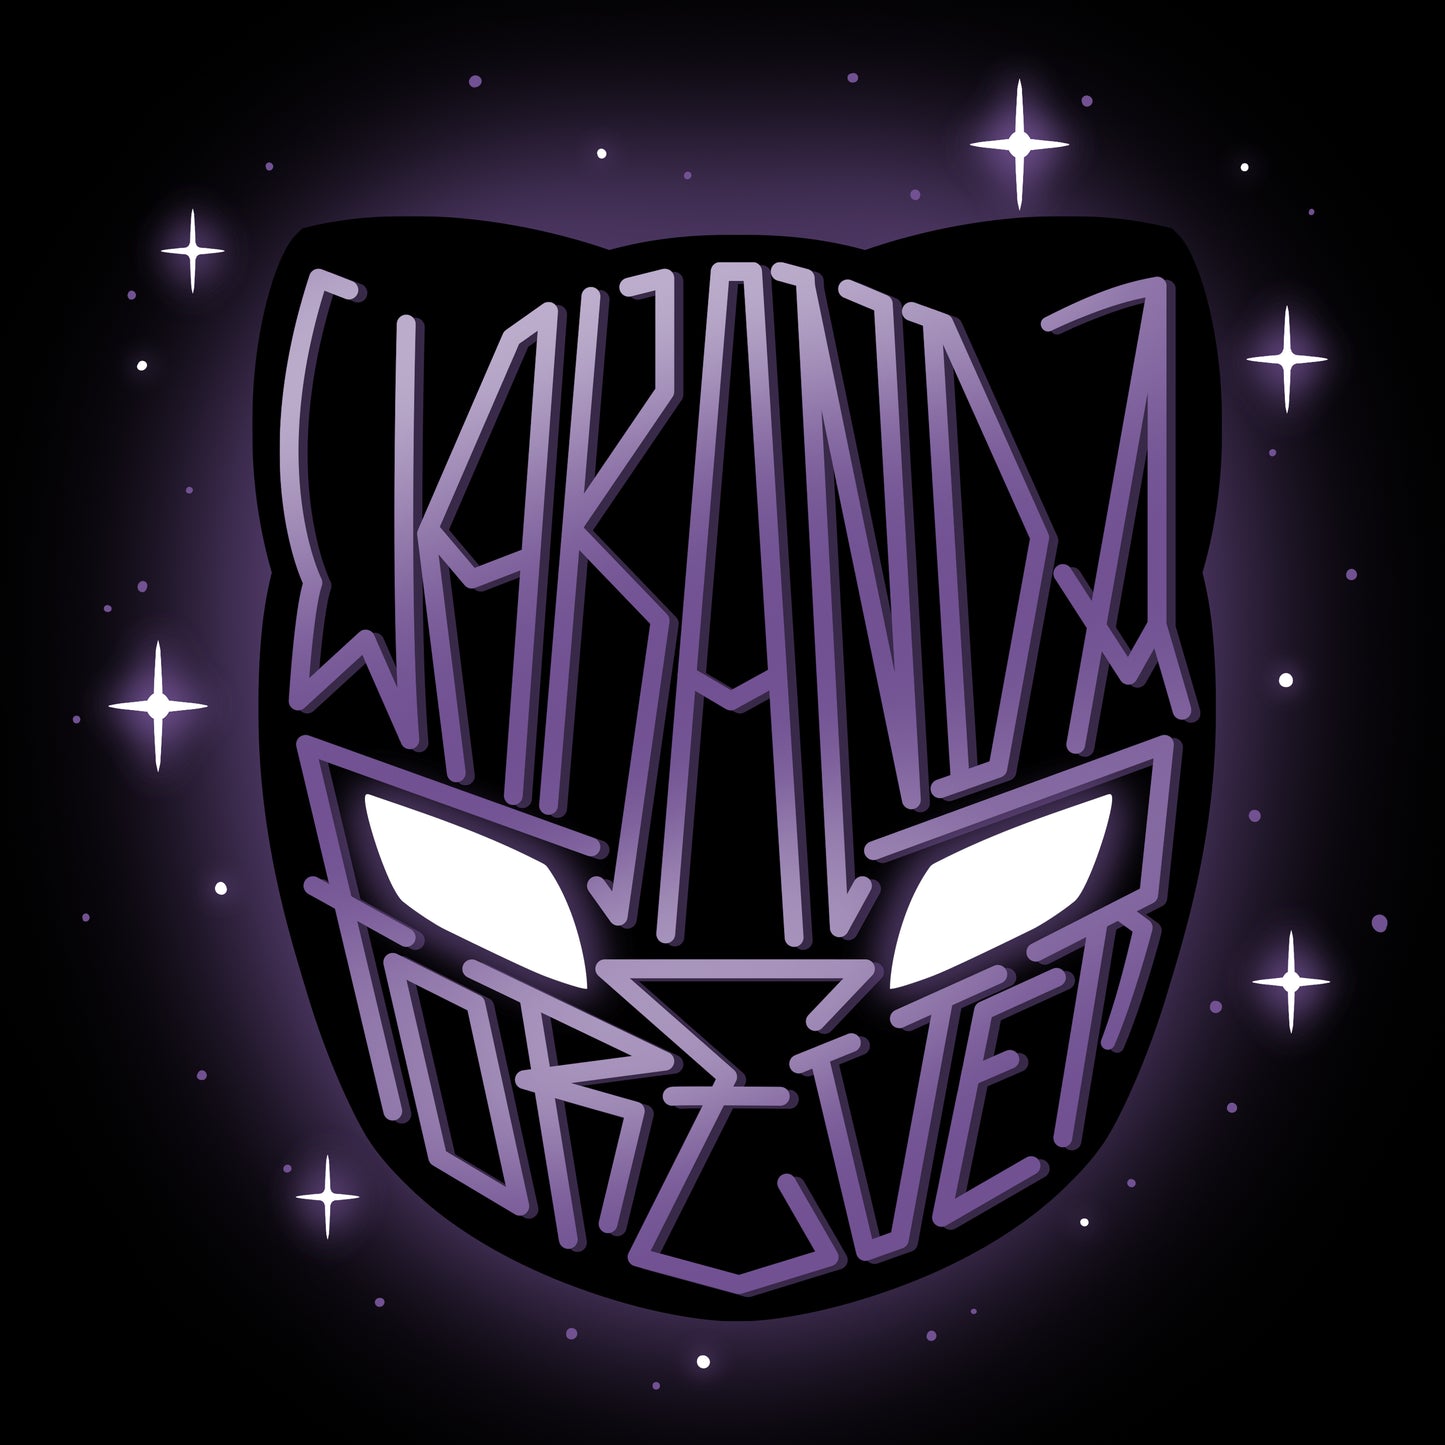 The logo for Wakanda Forever, inspired by Black Panther and the Marvel universe, by Marvel.